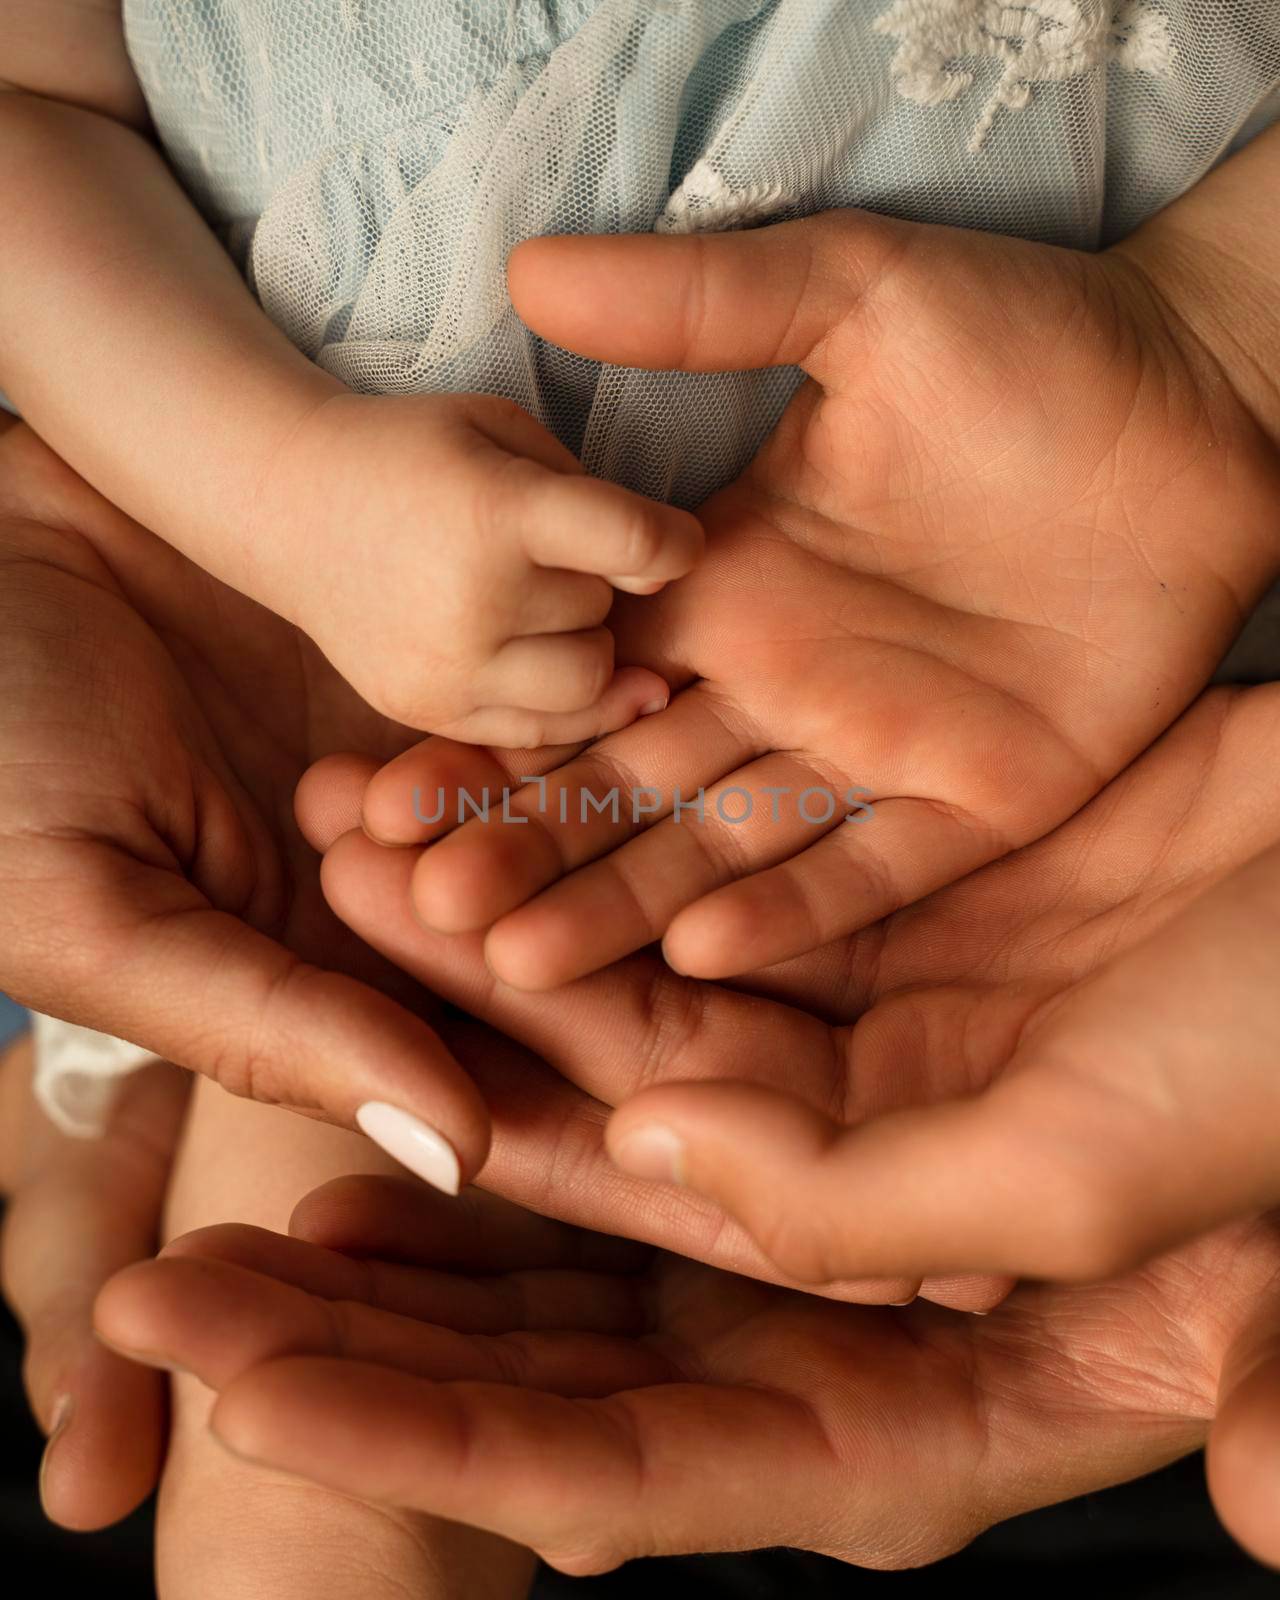 Close up of loving mom dad and kid hold hands on floor palms up together express closeness and unity, caring parents join stack arms with child show devotion, support and bonding. Family value concept